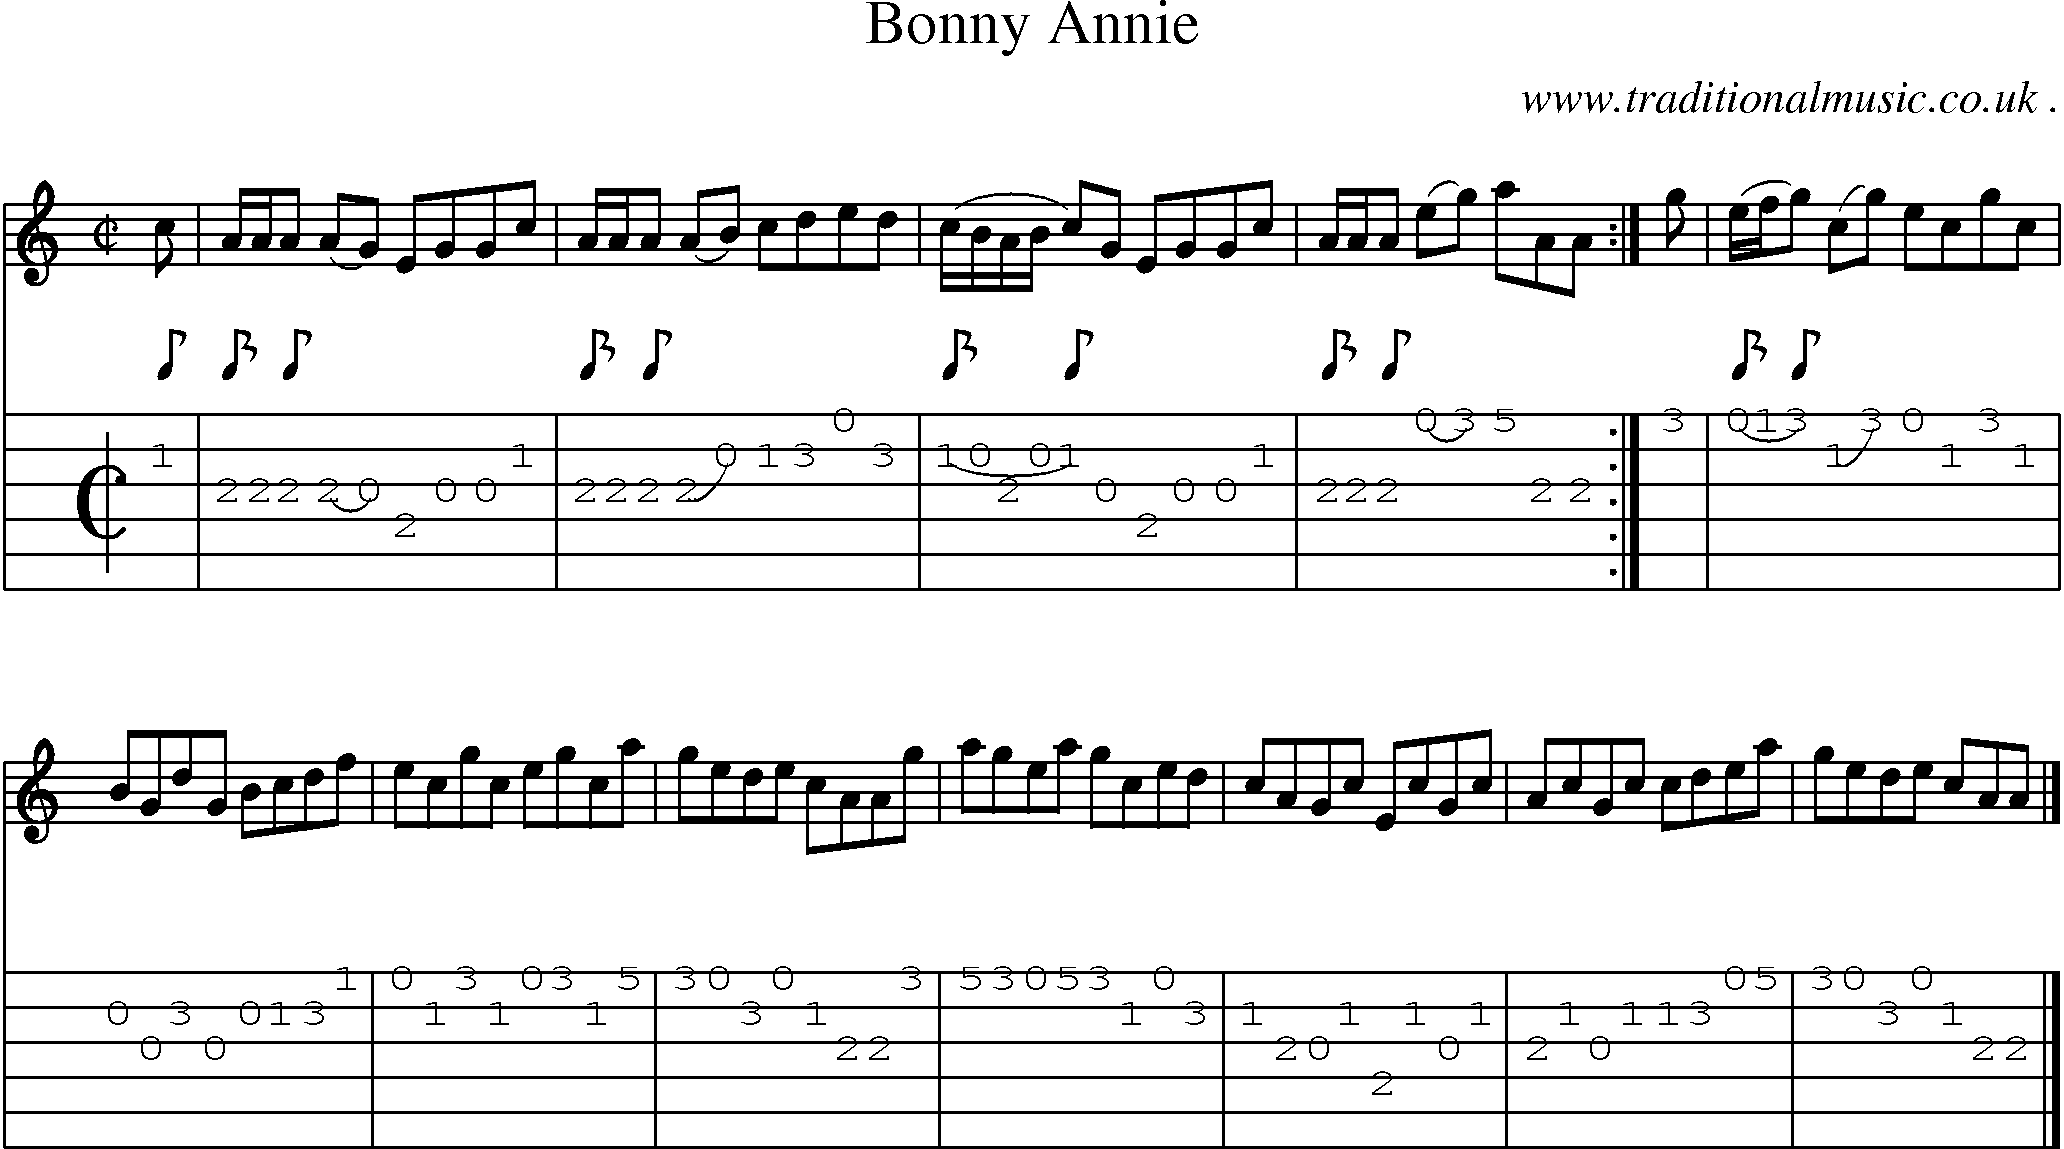 Sheet-music  score, Chords and Guitar Tabs for Bonny Annie